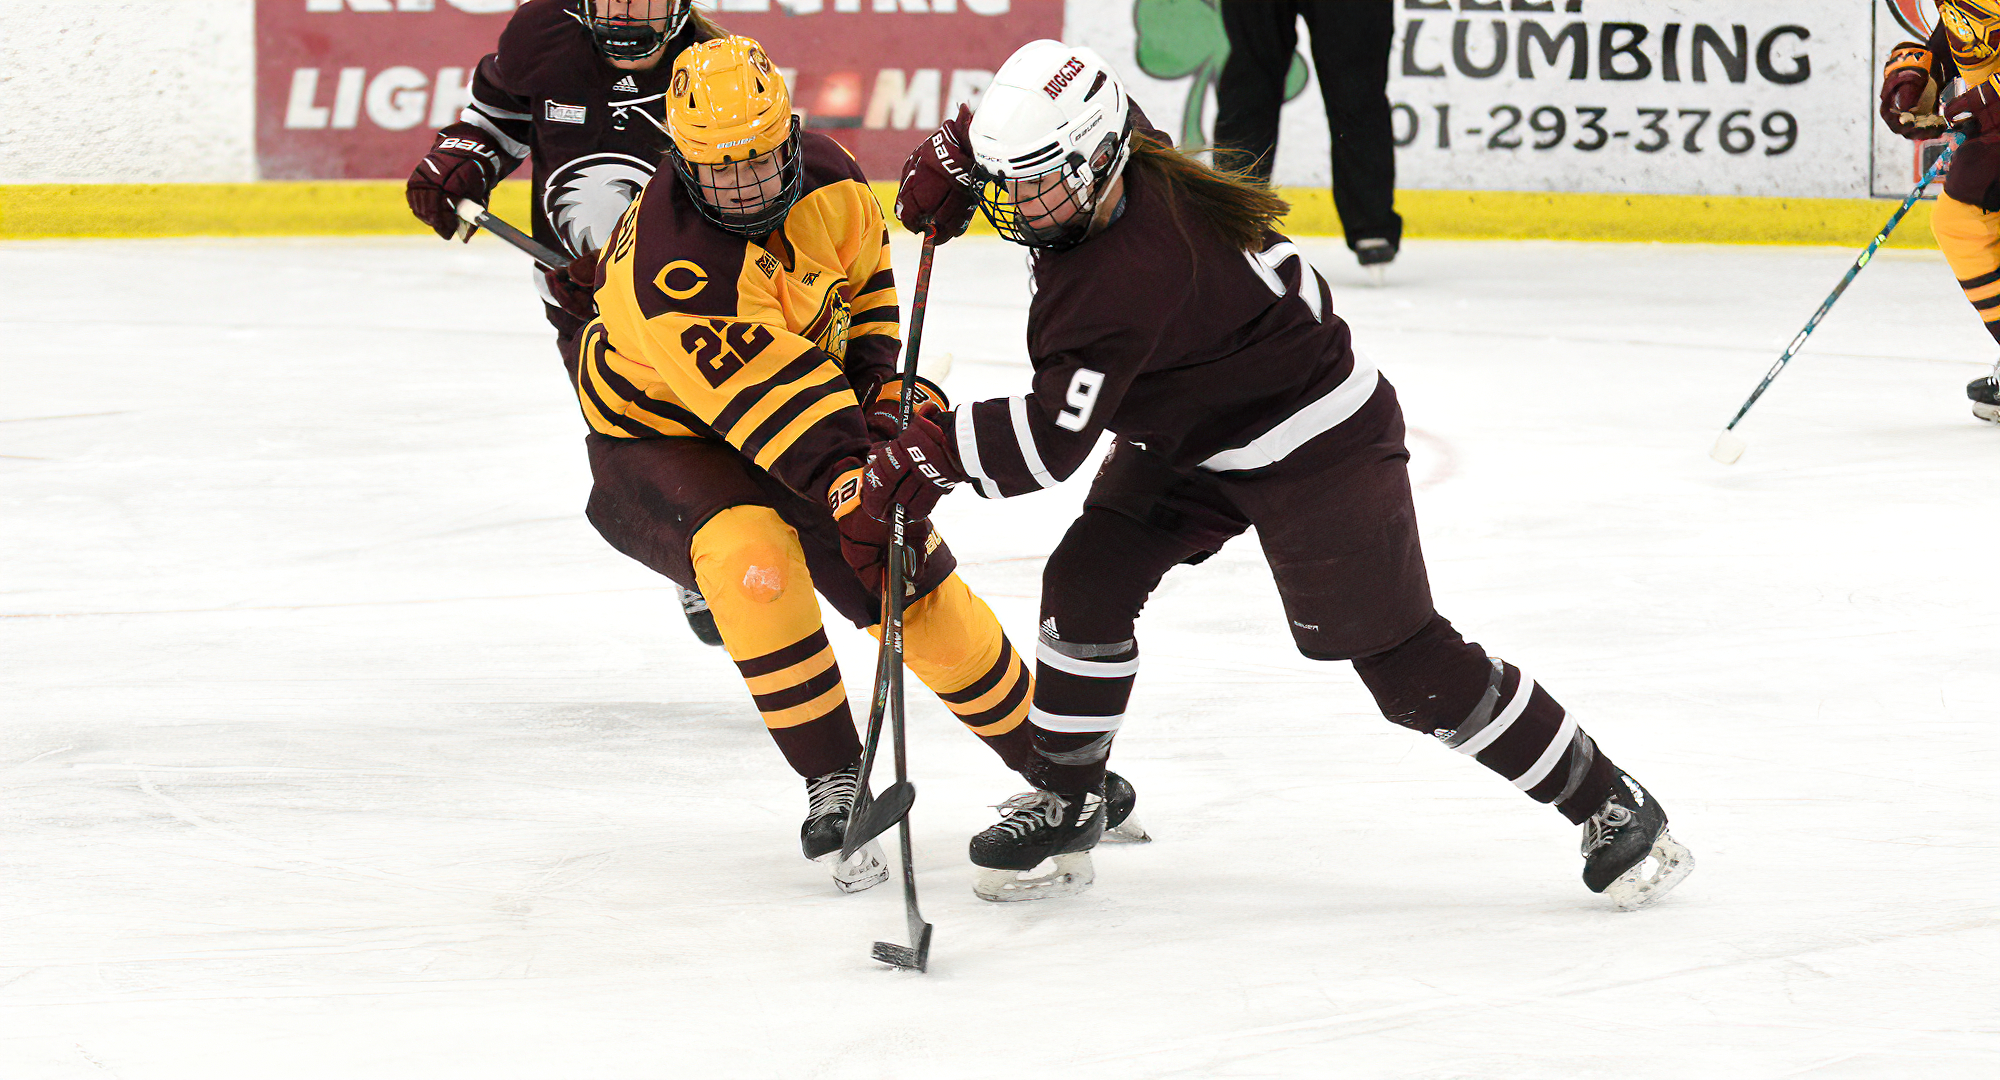 Sophomore Morgan Sauvageau had a pair of shots in the Cobbers' series opener at Augsburg.